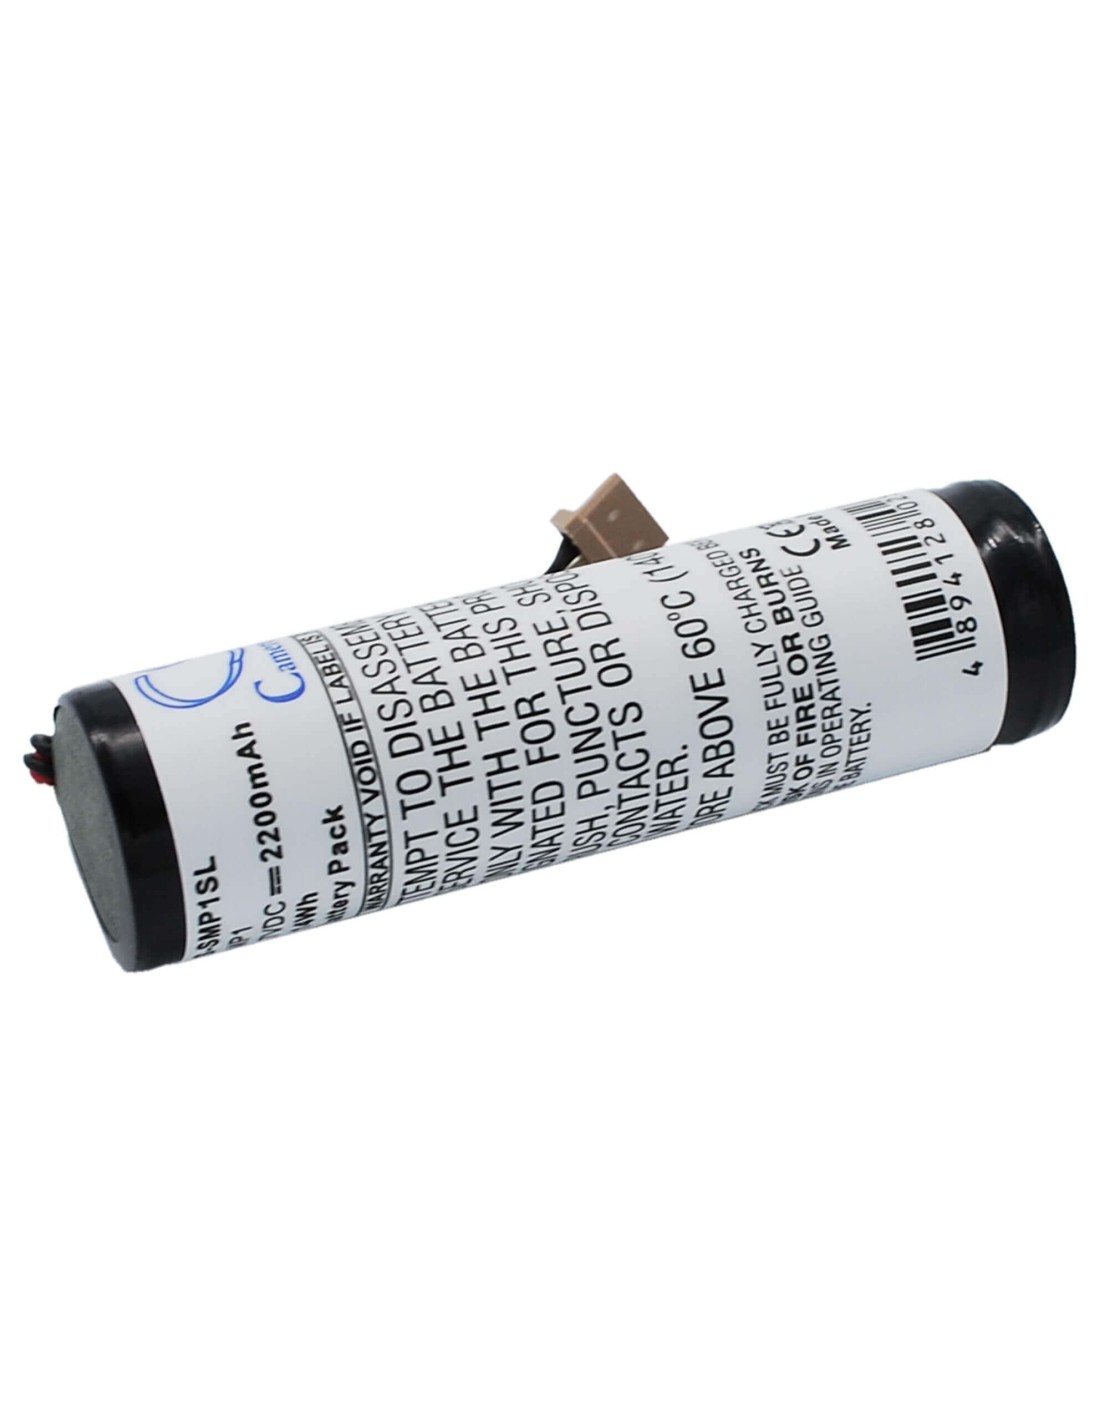 Battery for Sony Hmp-a1 3.7V, 2200mAh - 8.14Wh